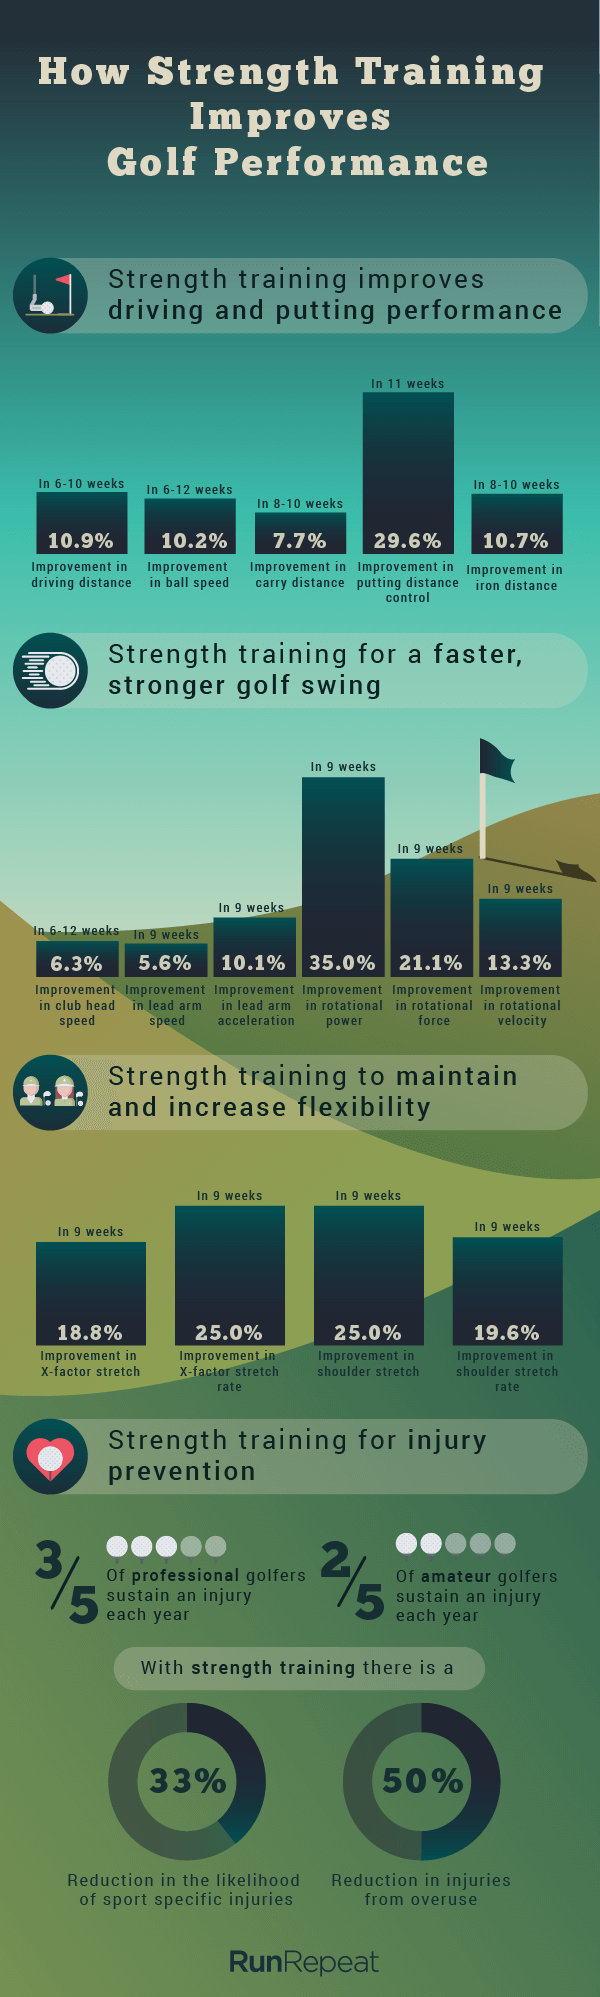 how-strength-training-for-golf-improves-performance